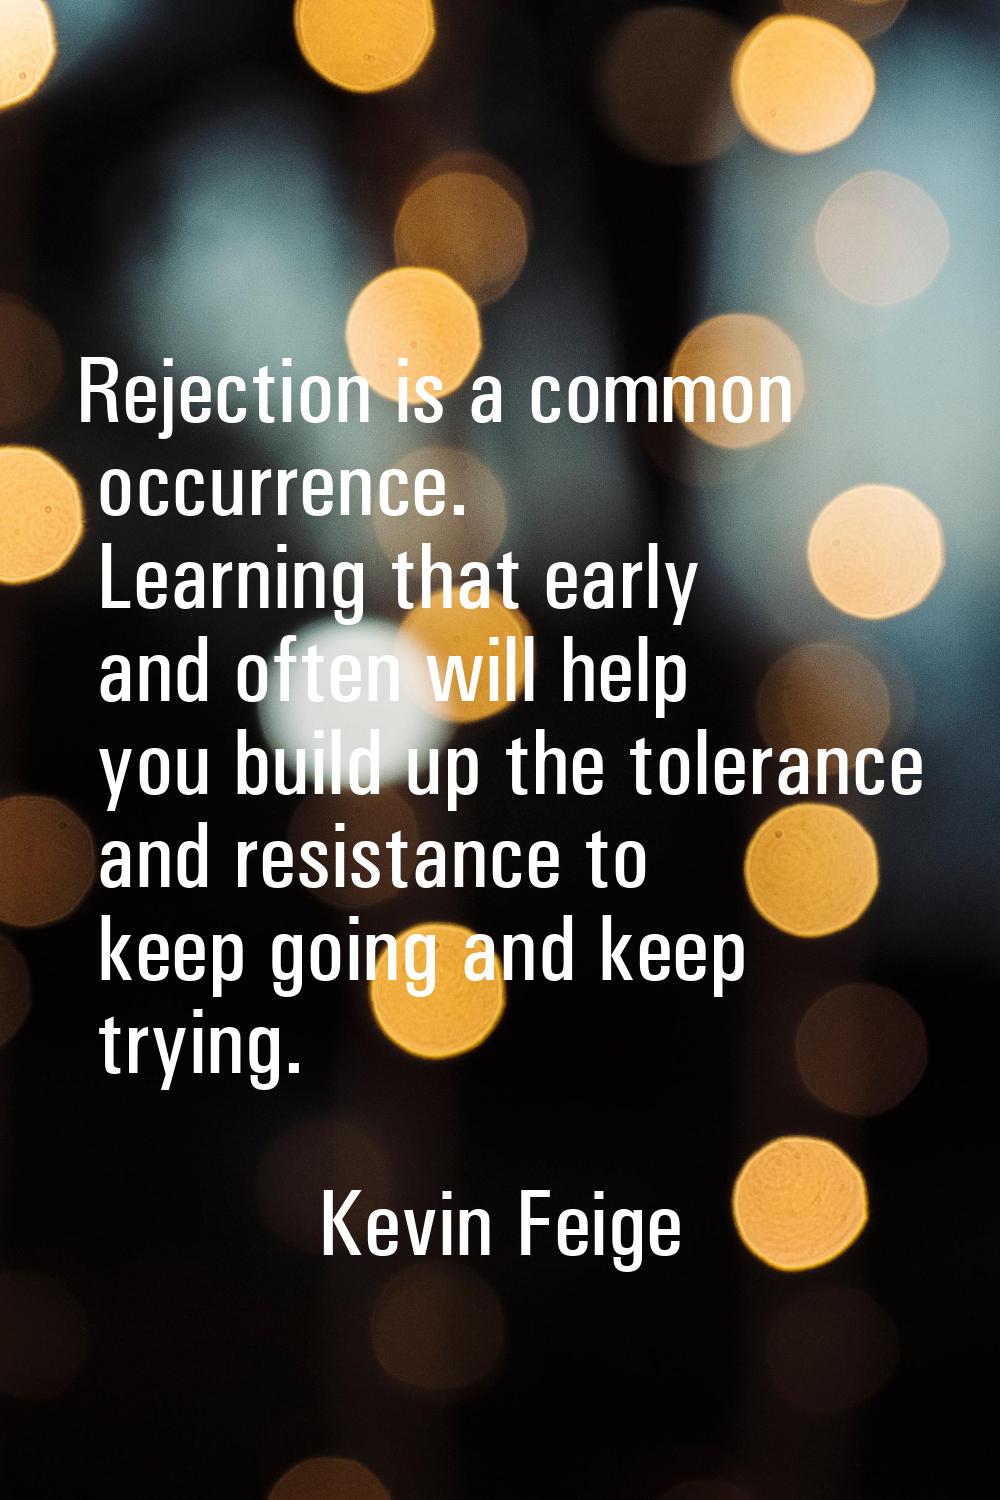 Rejection is a common occurrence. Learning that early and often will help you build up the toleranc